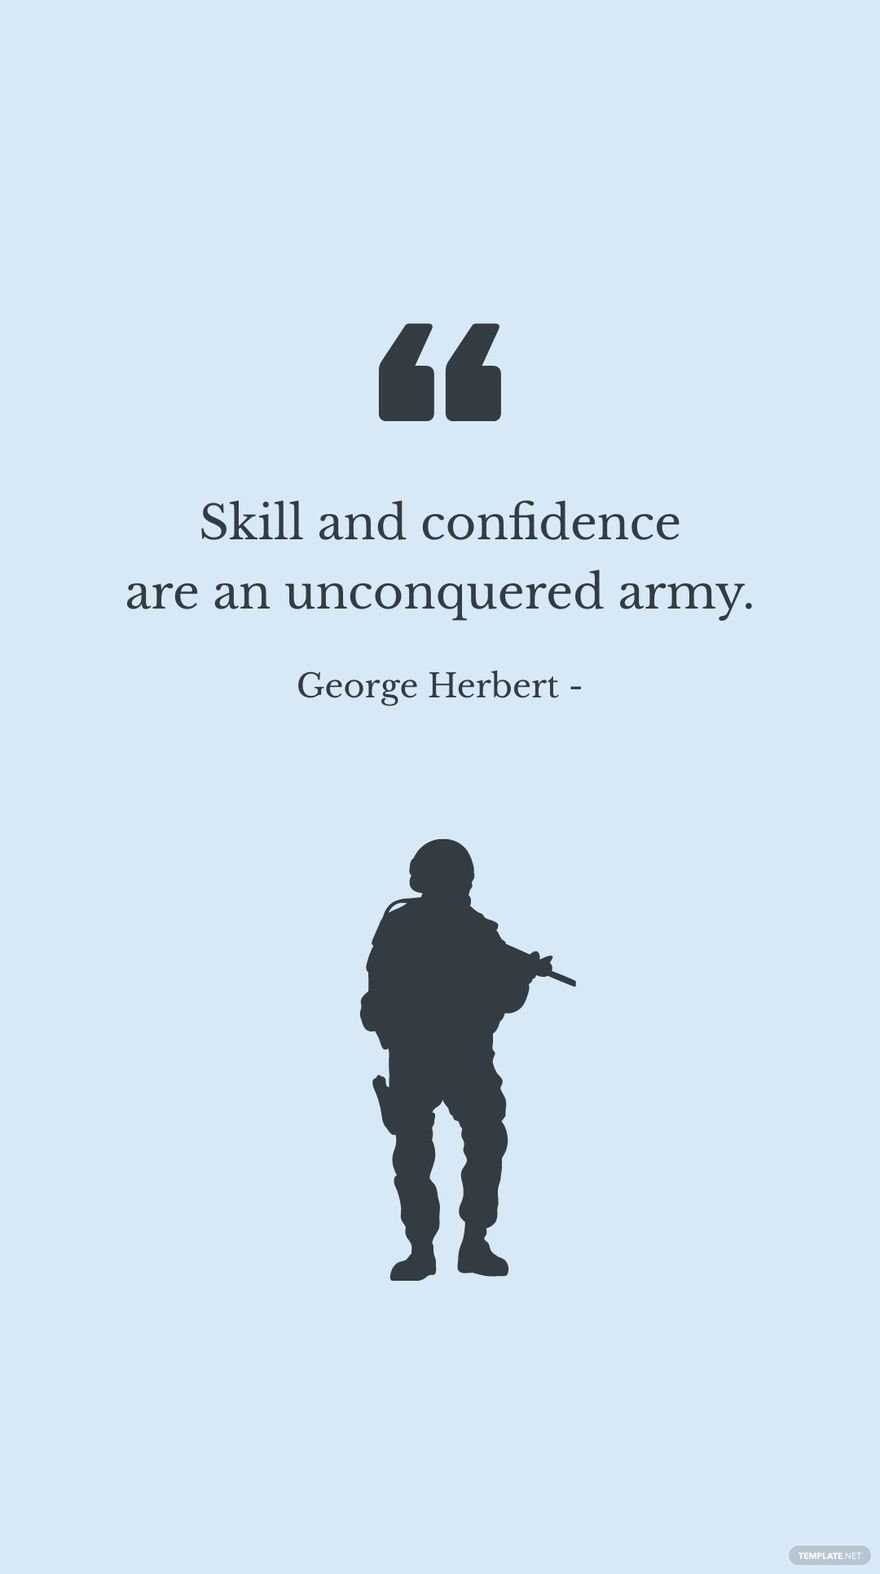 Free George Herbert - Skill and confidence are an unconquered army. in JPG